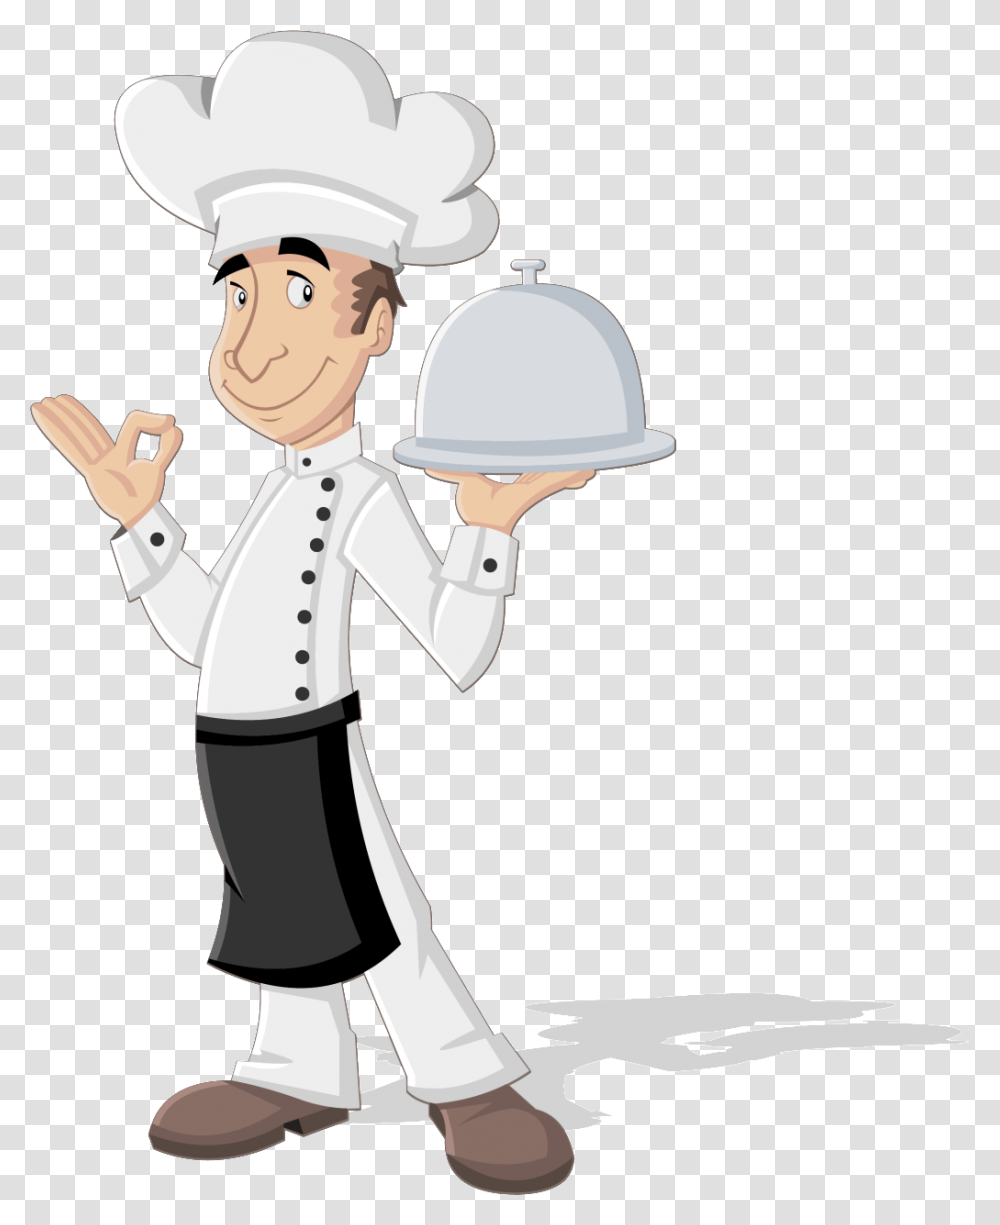 Serving Waiter Catering Industry Chef Cartoon Background Cartoon Chef Cooking, Toy Transparent Png